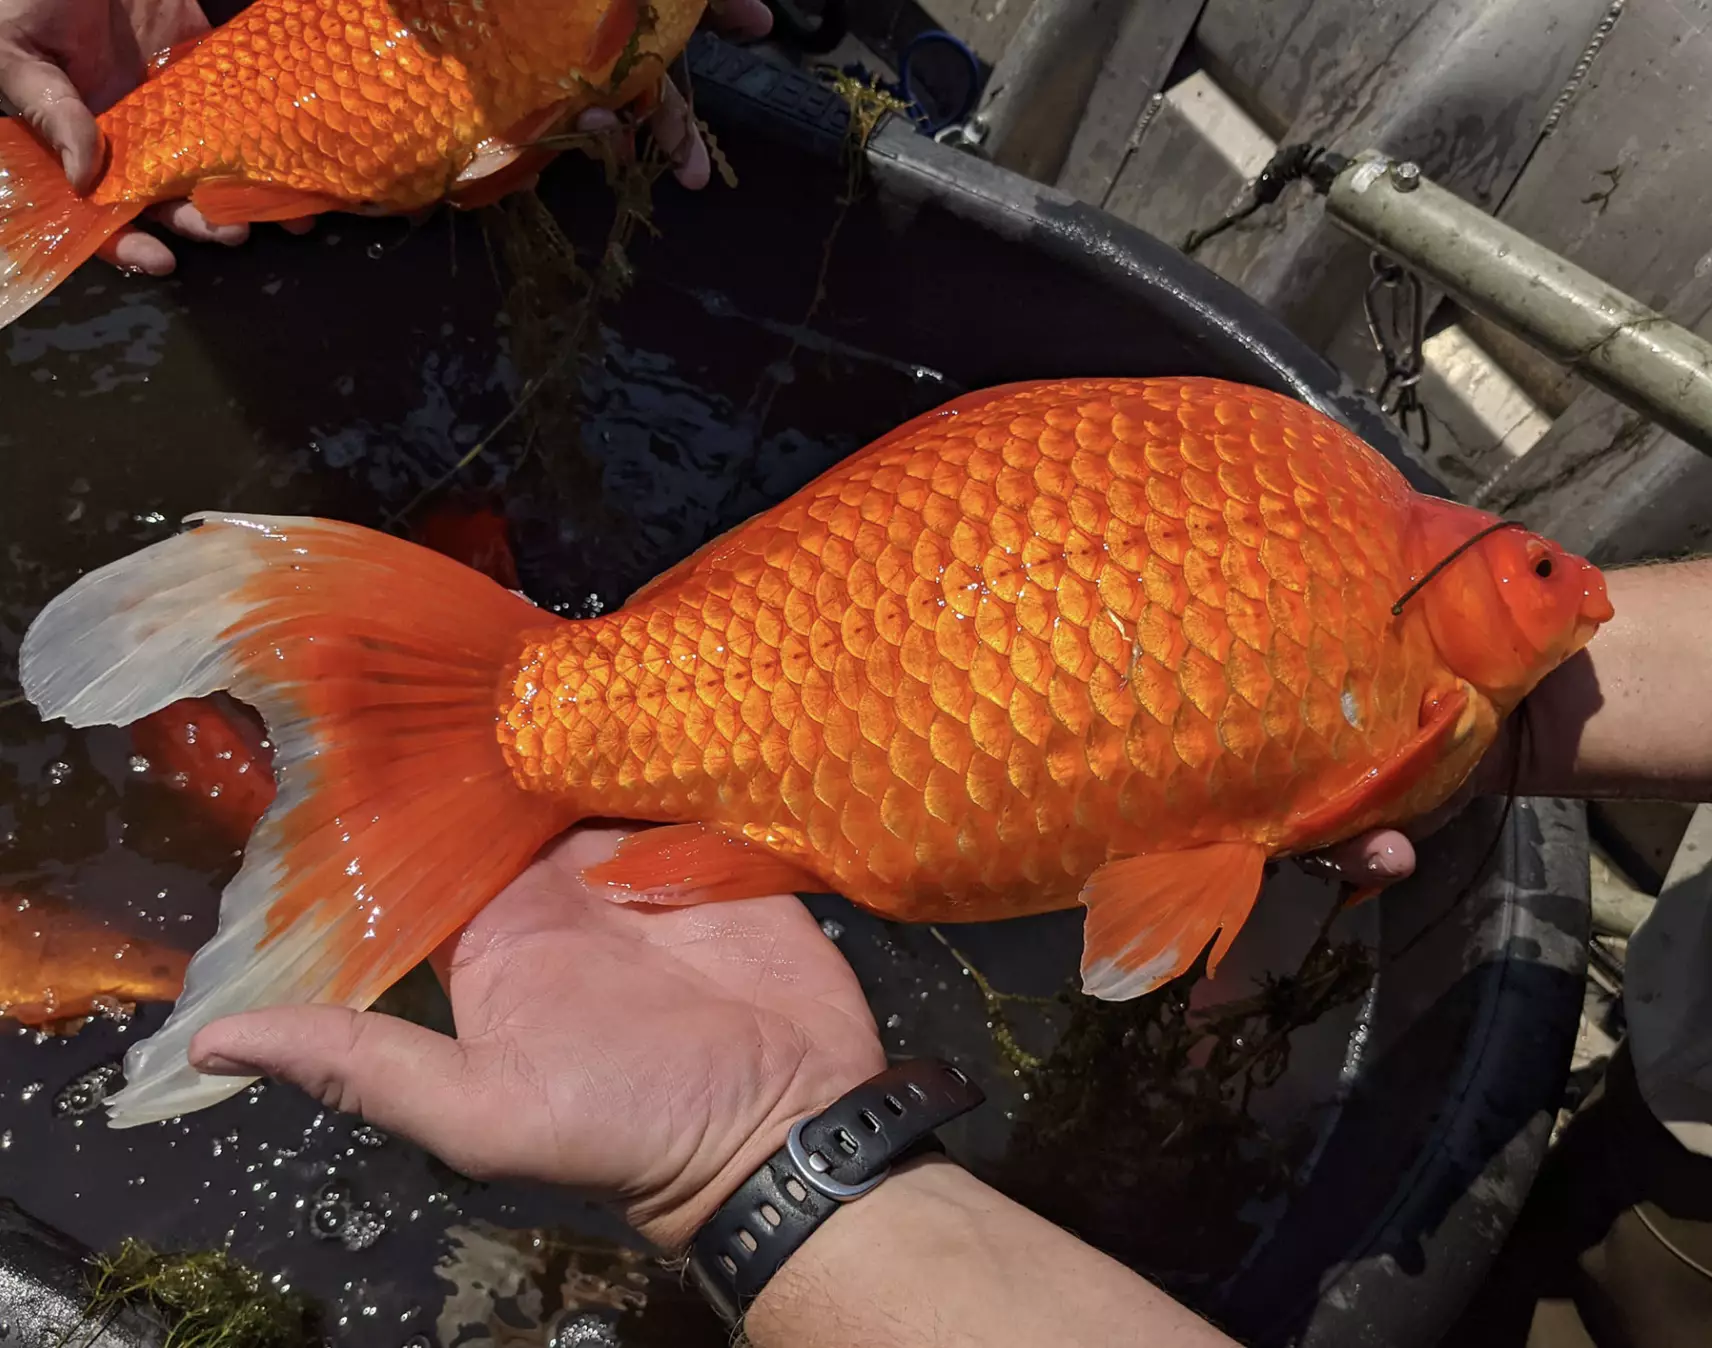 Giant goldfish were found in a lake (